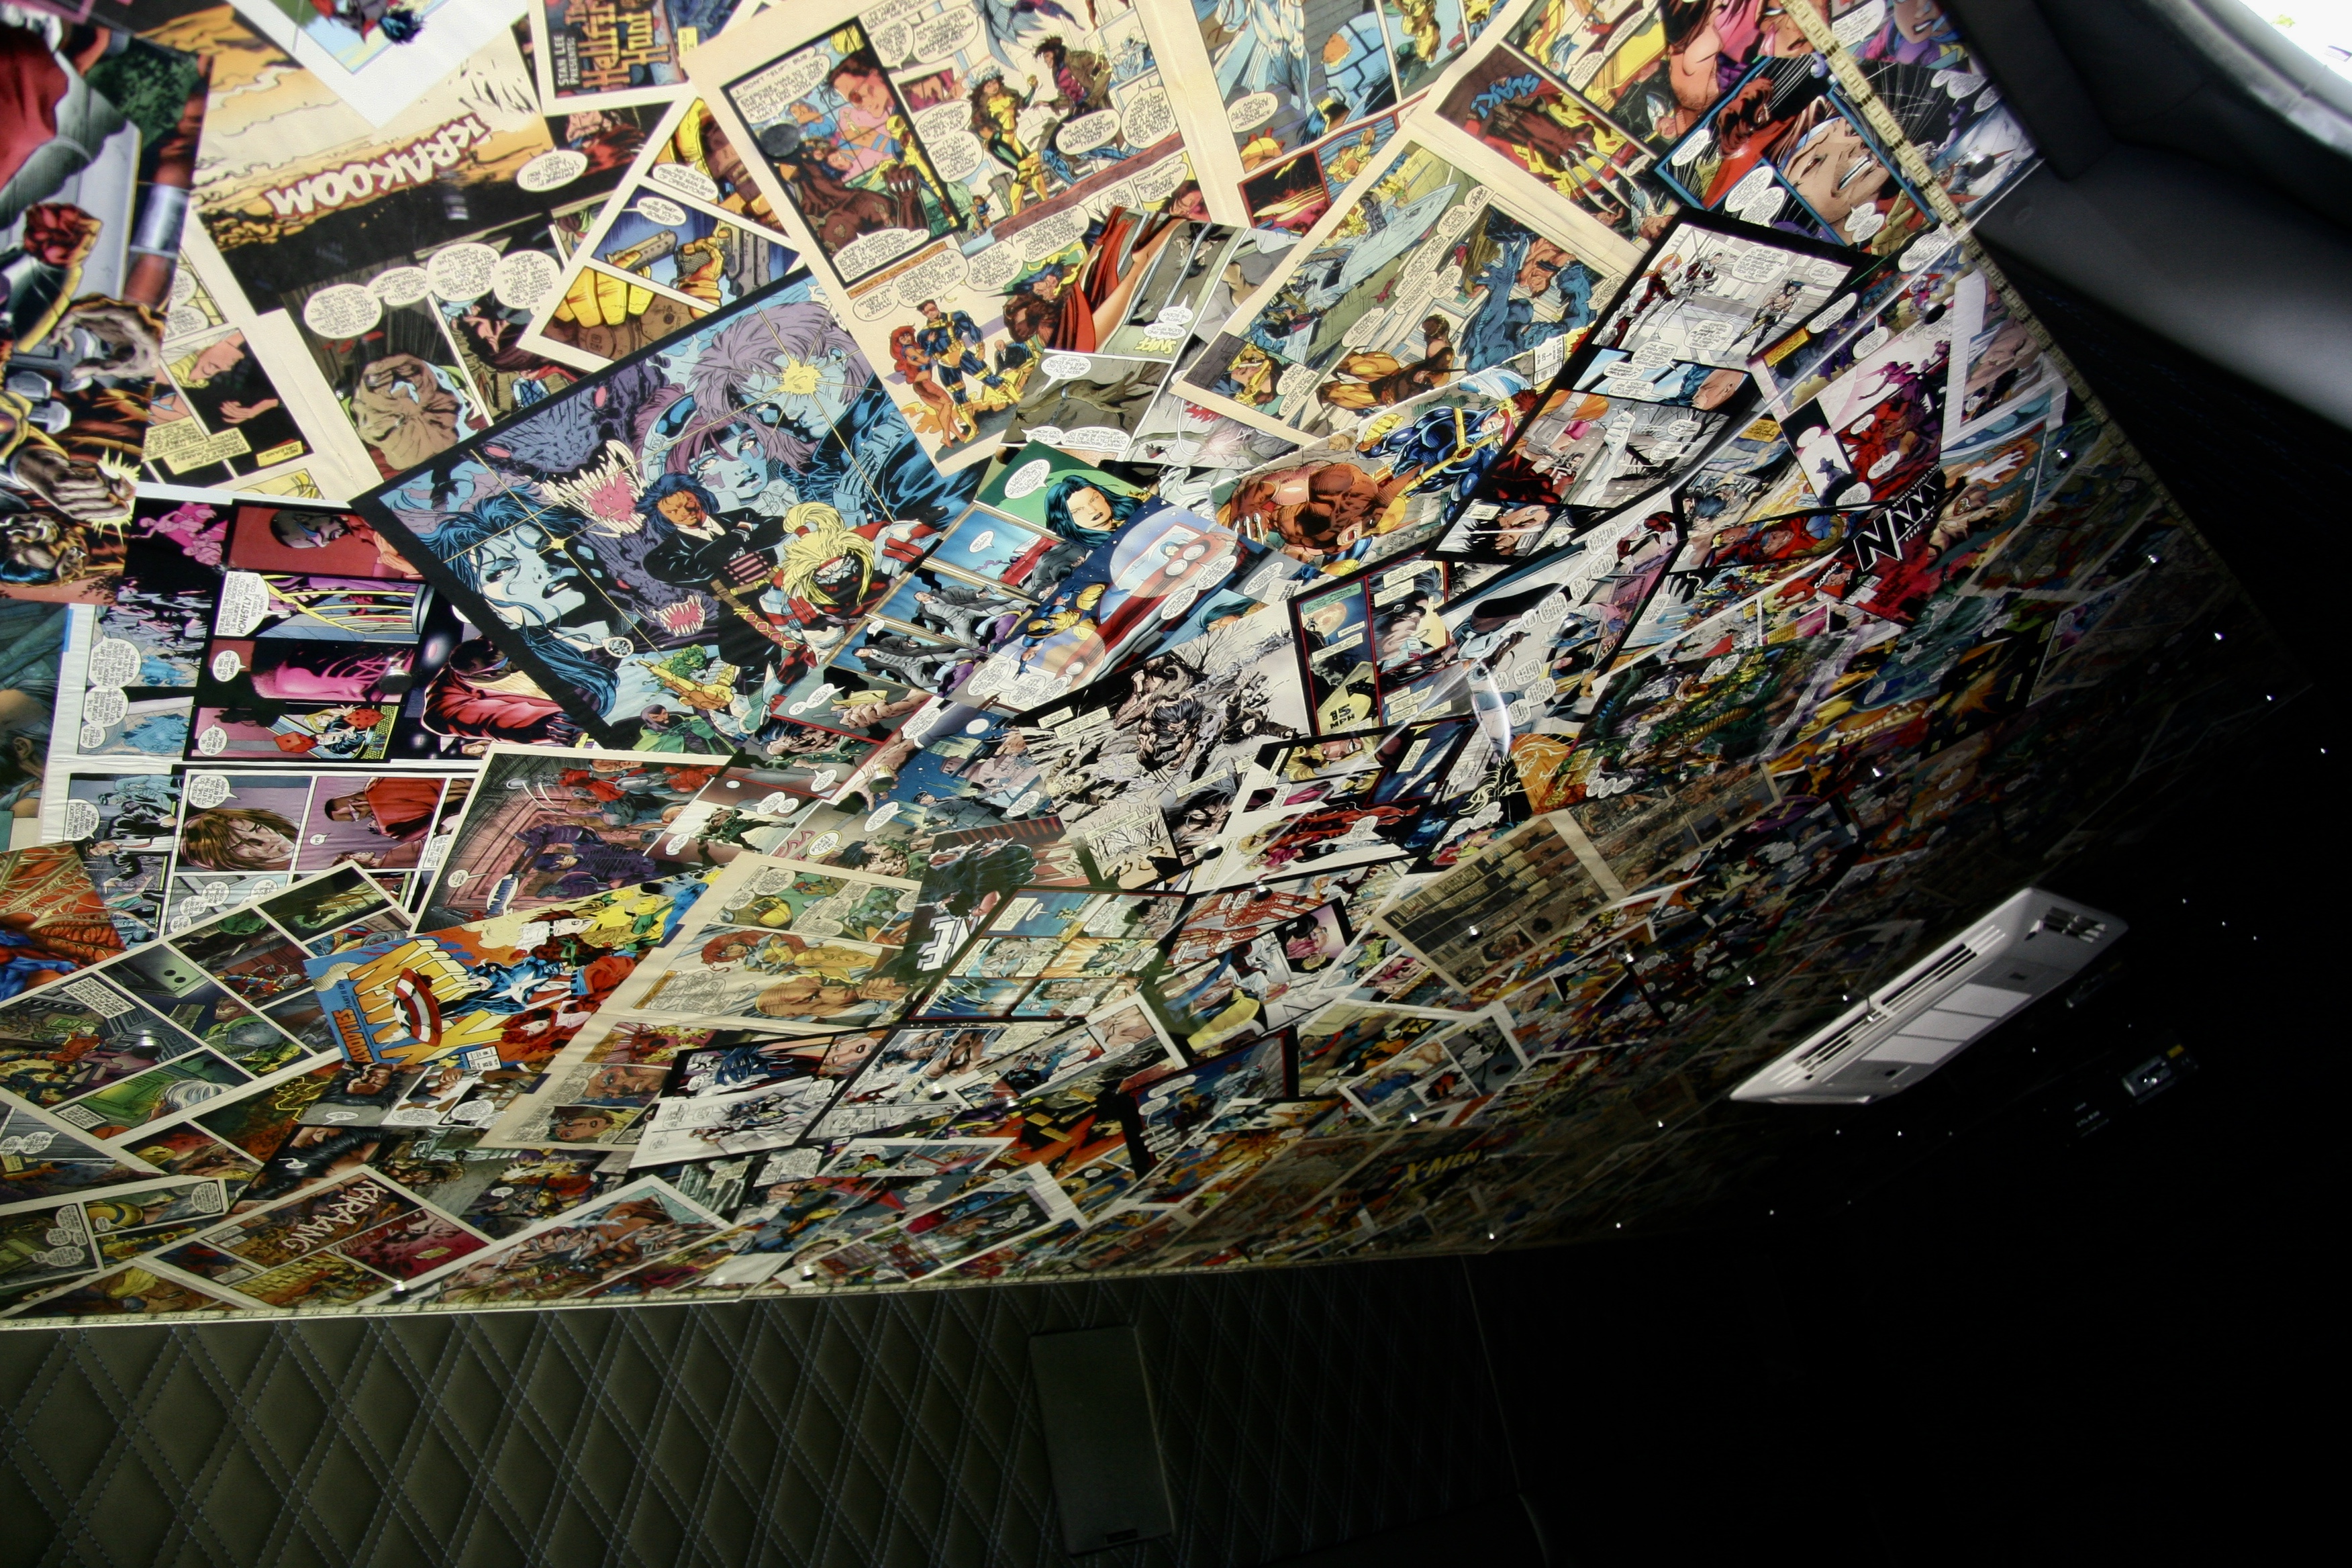 The roof has been finished in classic comics